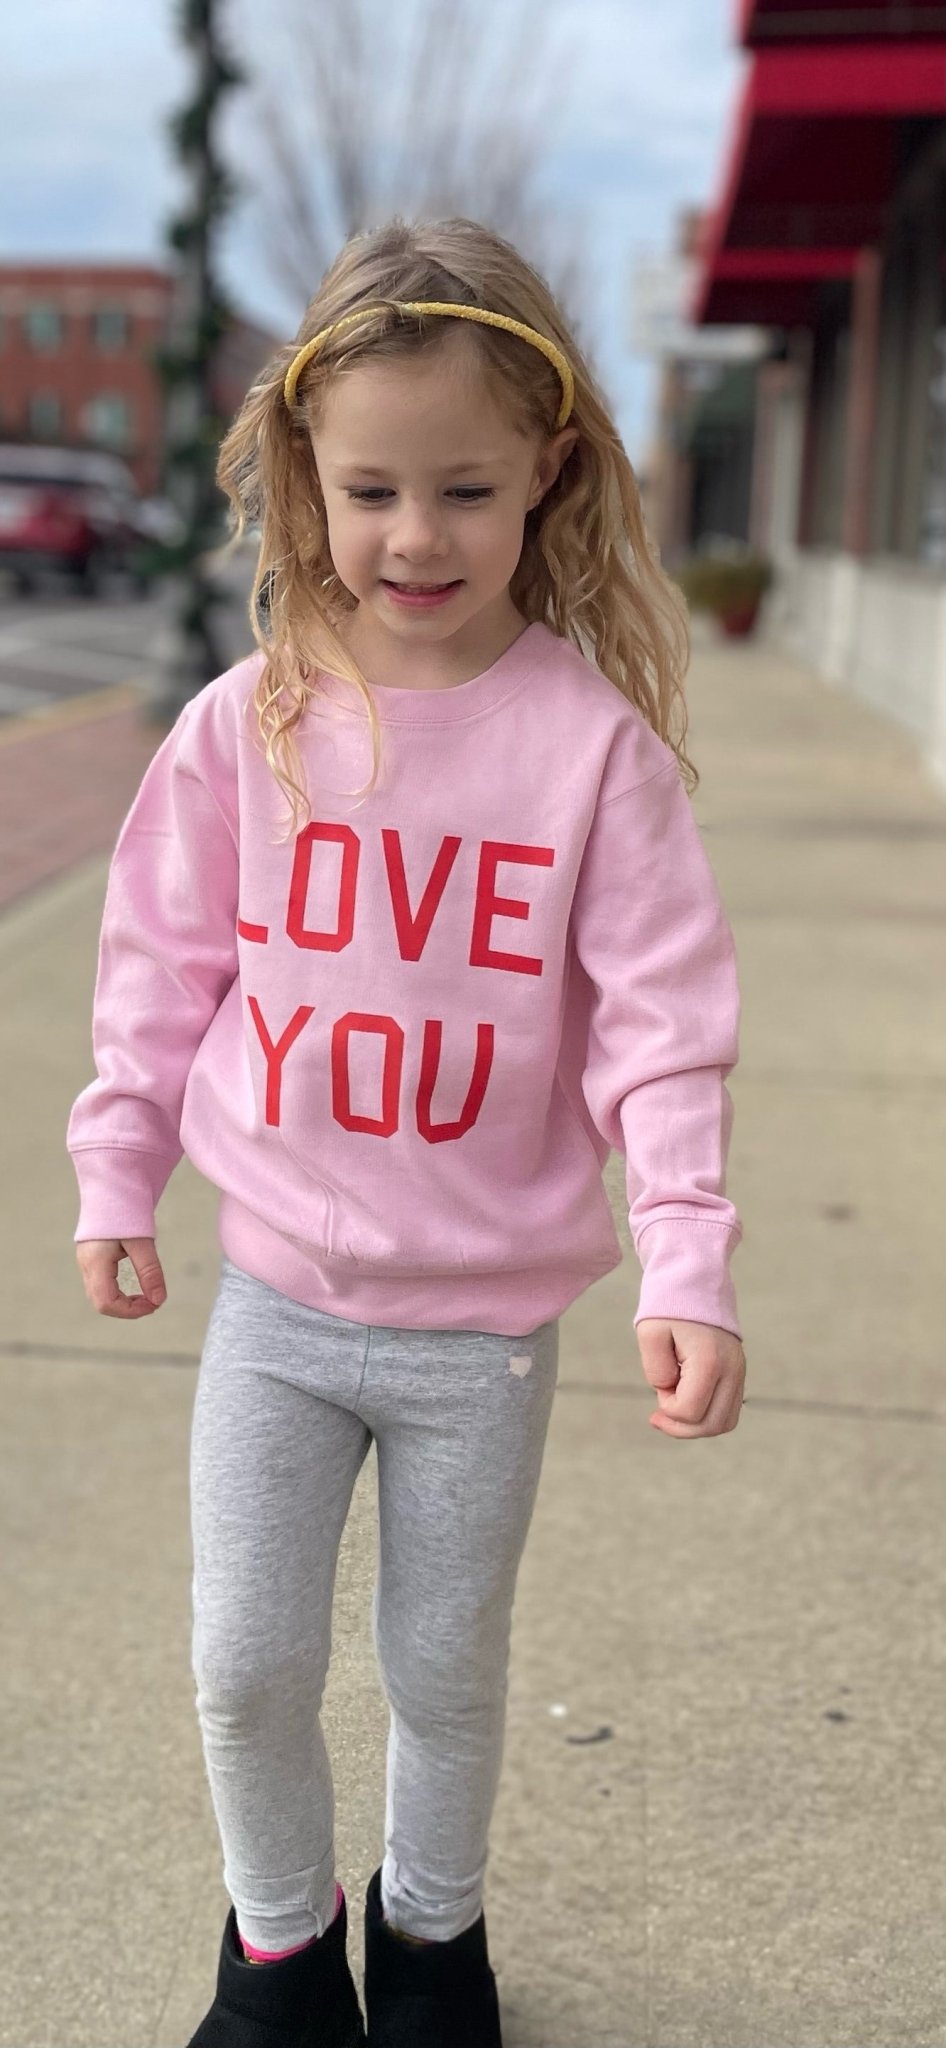 Love You | Toddler Sweatshirt | Red and Pink - Charlie Rae - Pink - Girls Tops- 170 - Charlie Rae